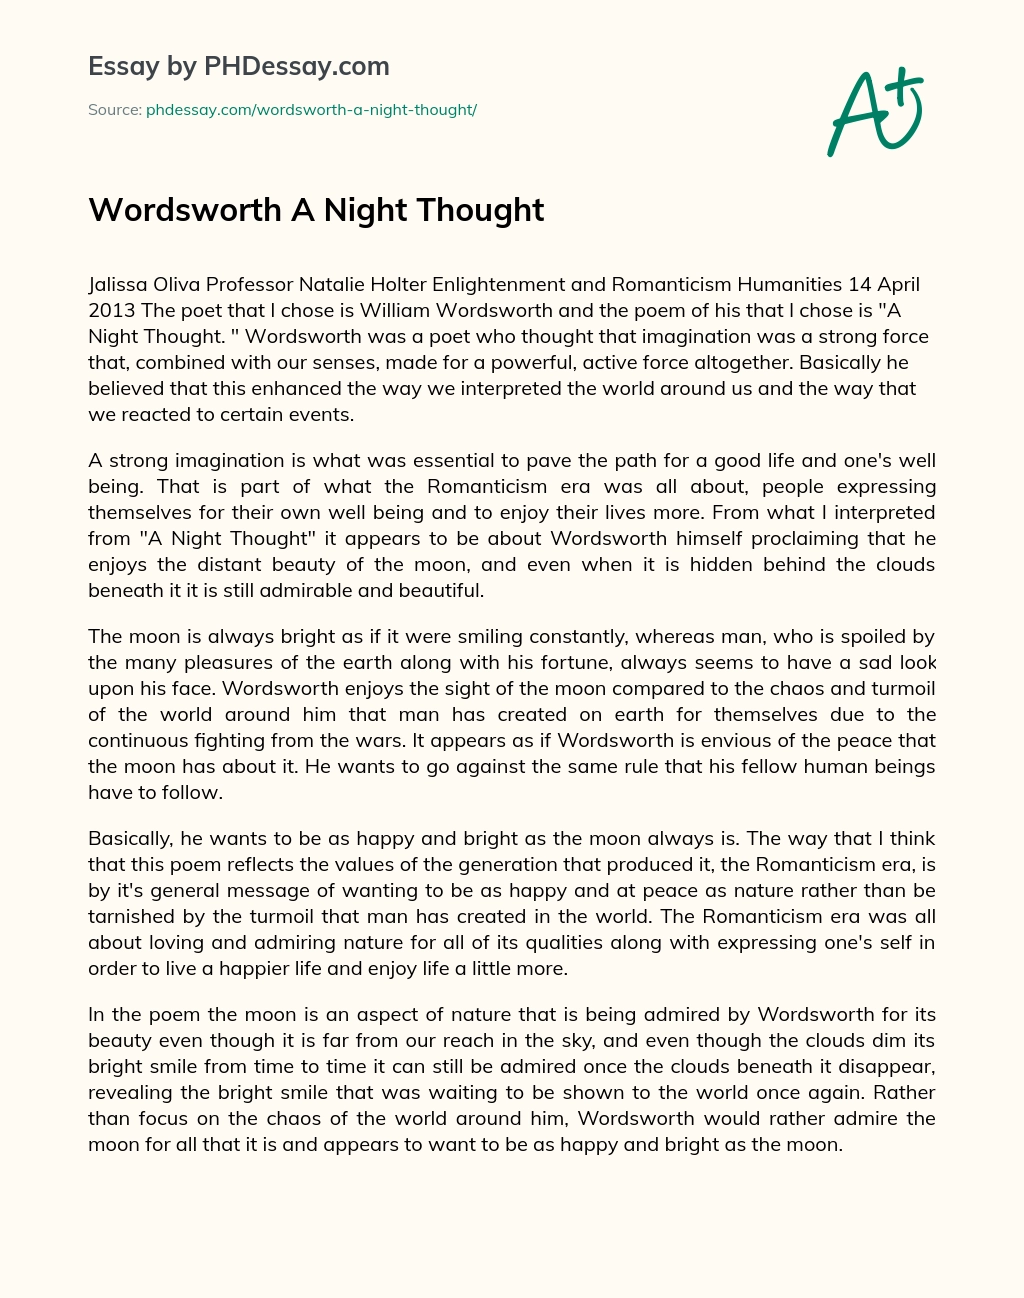 Wordsworth A Night Thought essay